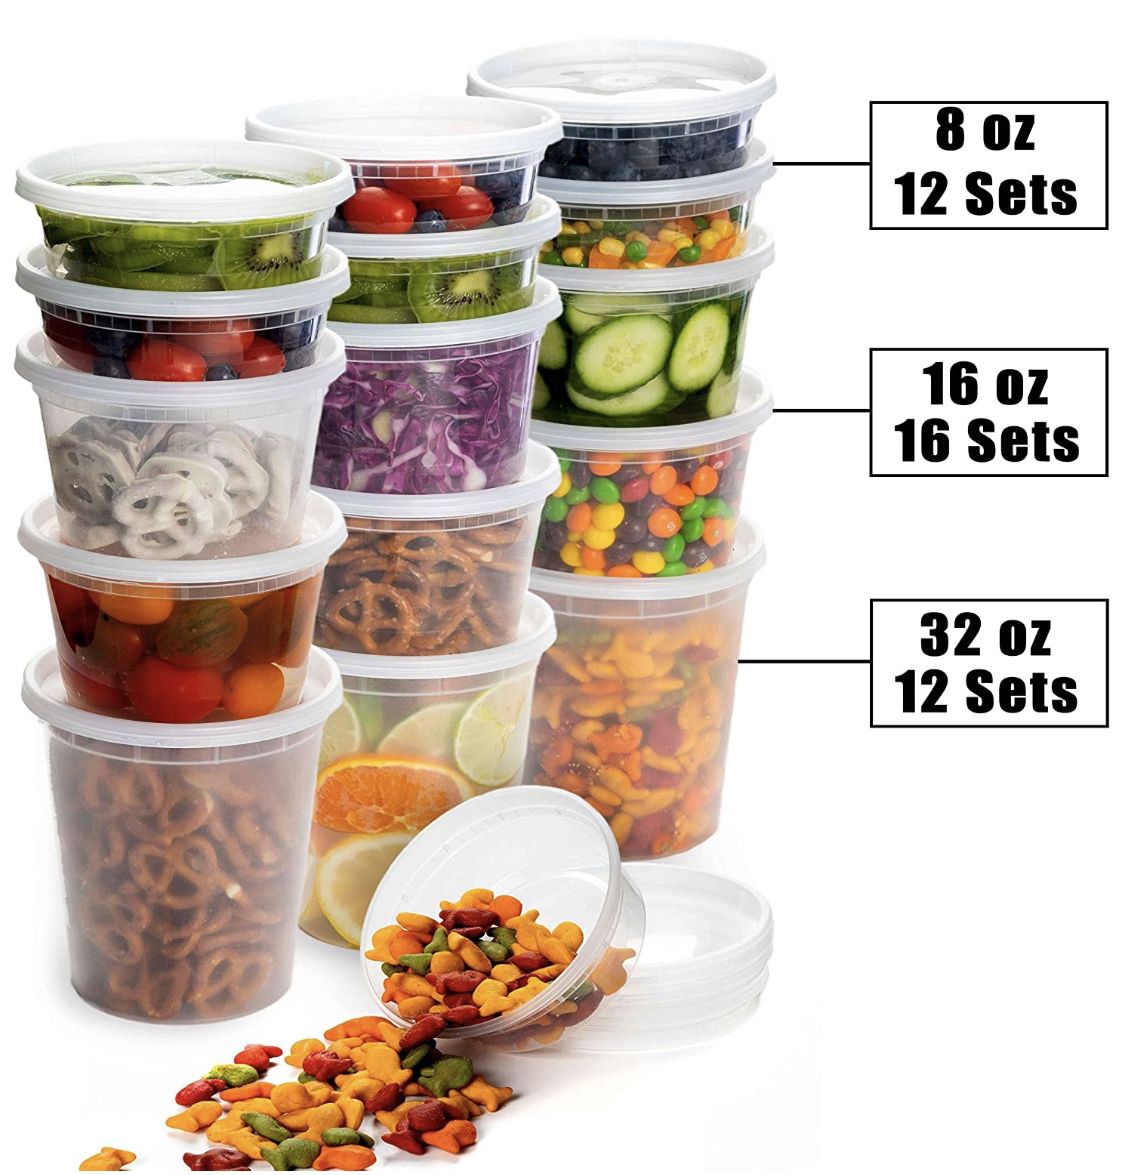 Food prep/storage containers